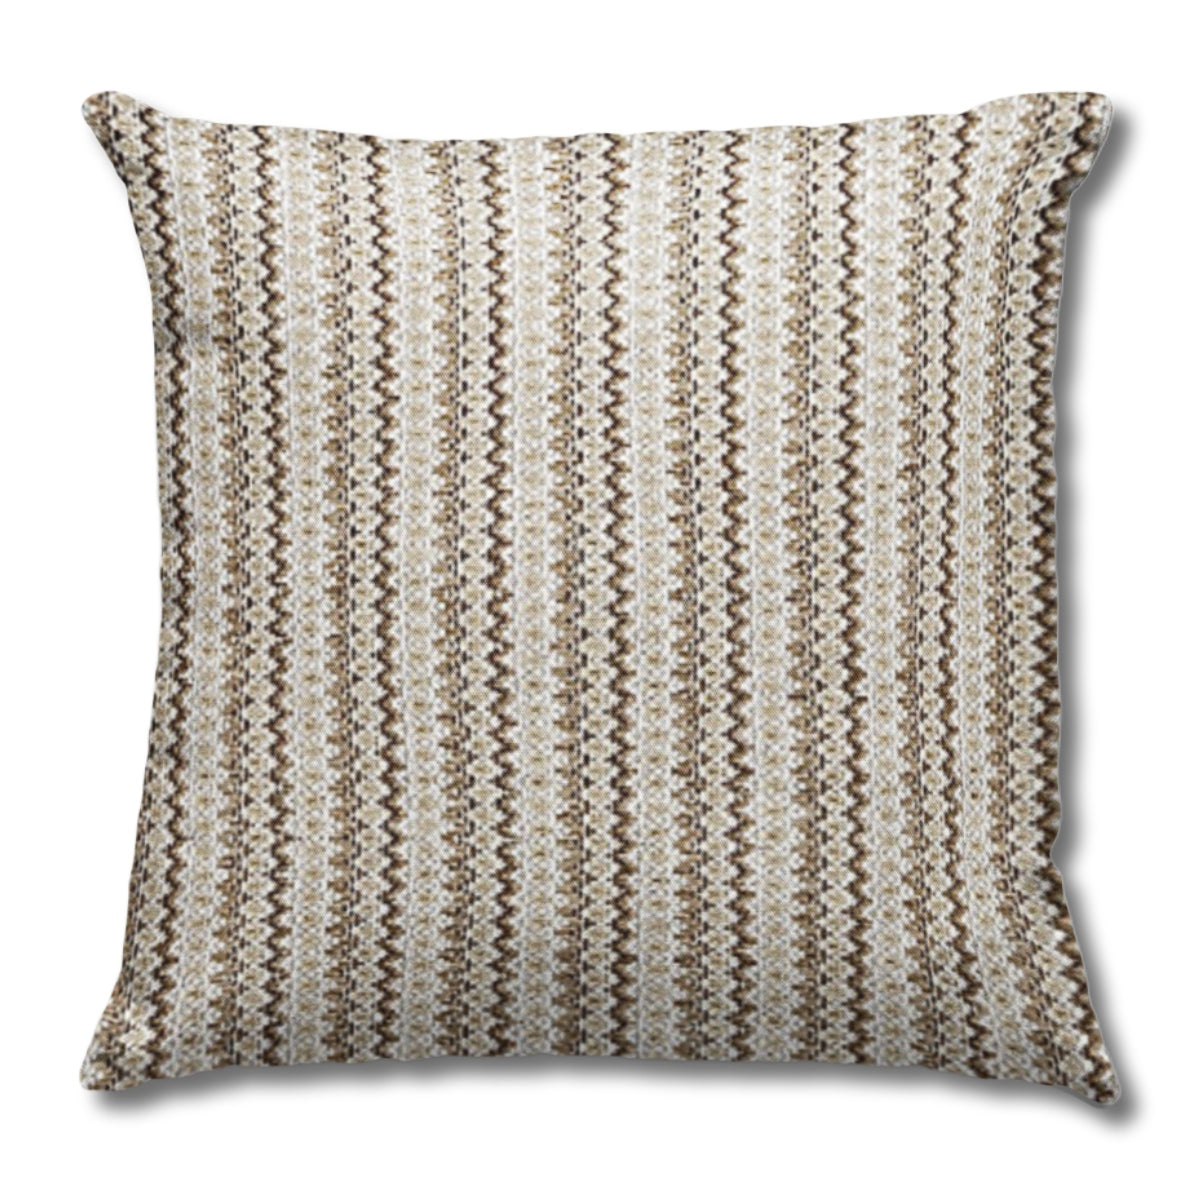 Carvalhal Outdoor Accent Pillow